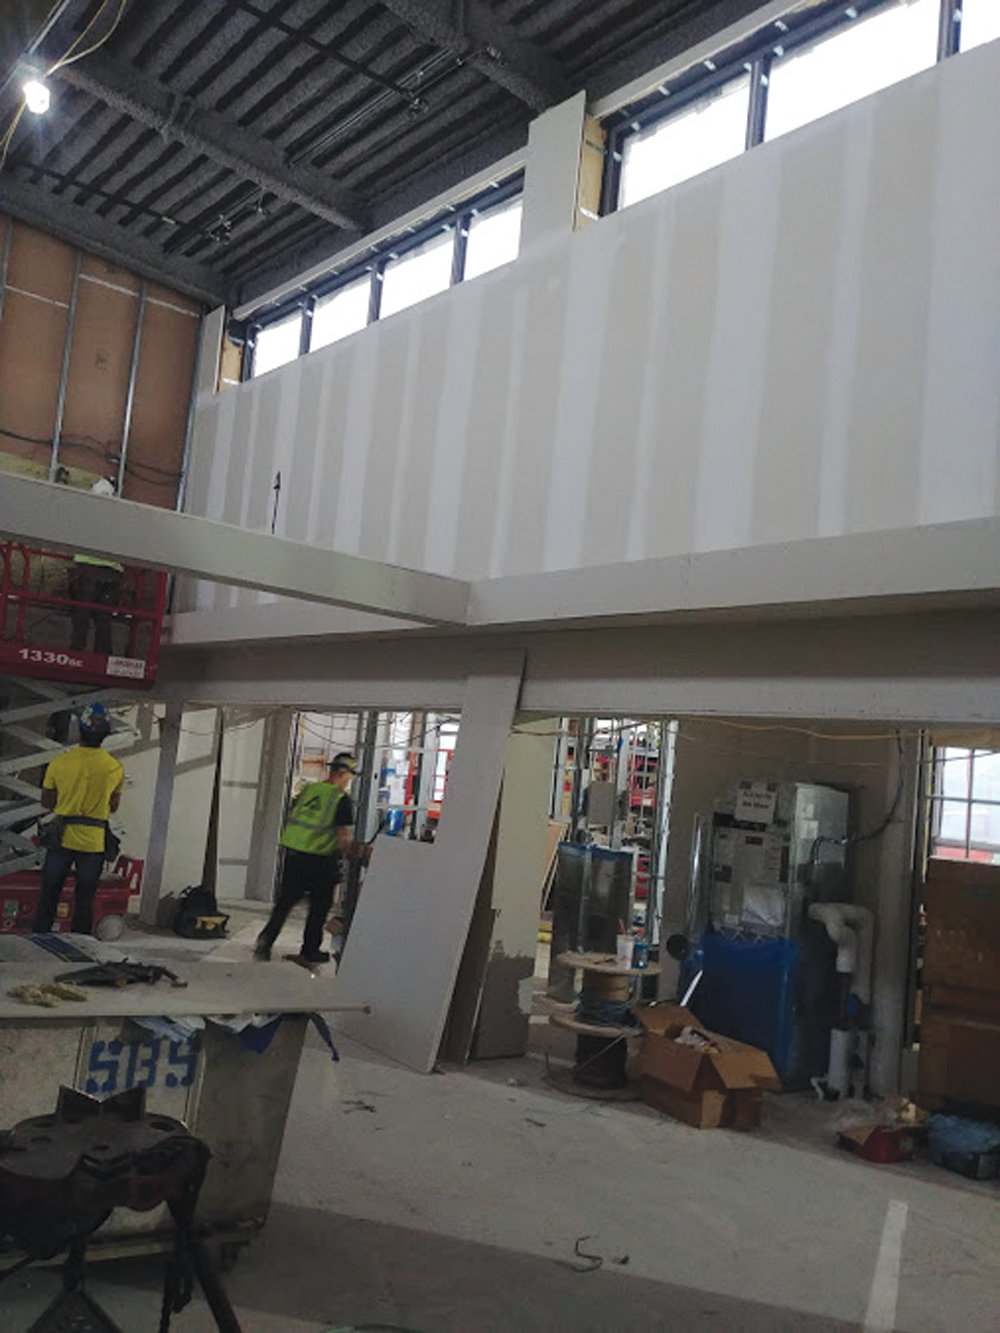 UTILIZING EVERY SPACE: The hallways at Eden Park will be a Learning Commons and meeting space, while the ceiling has been raised and new windows have been installed.